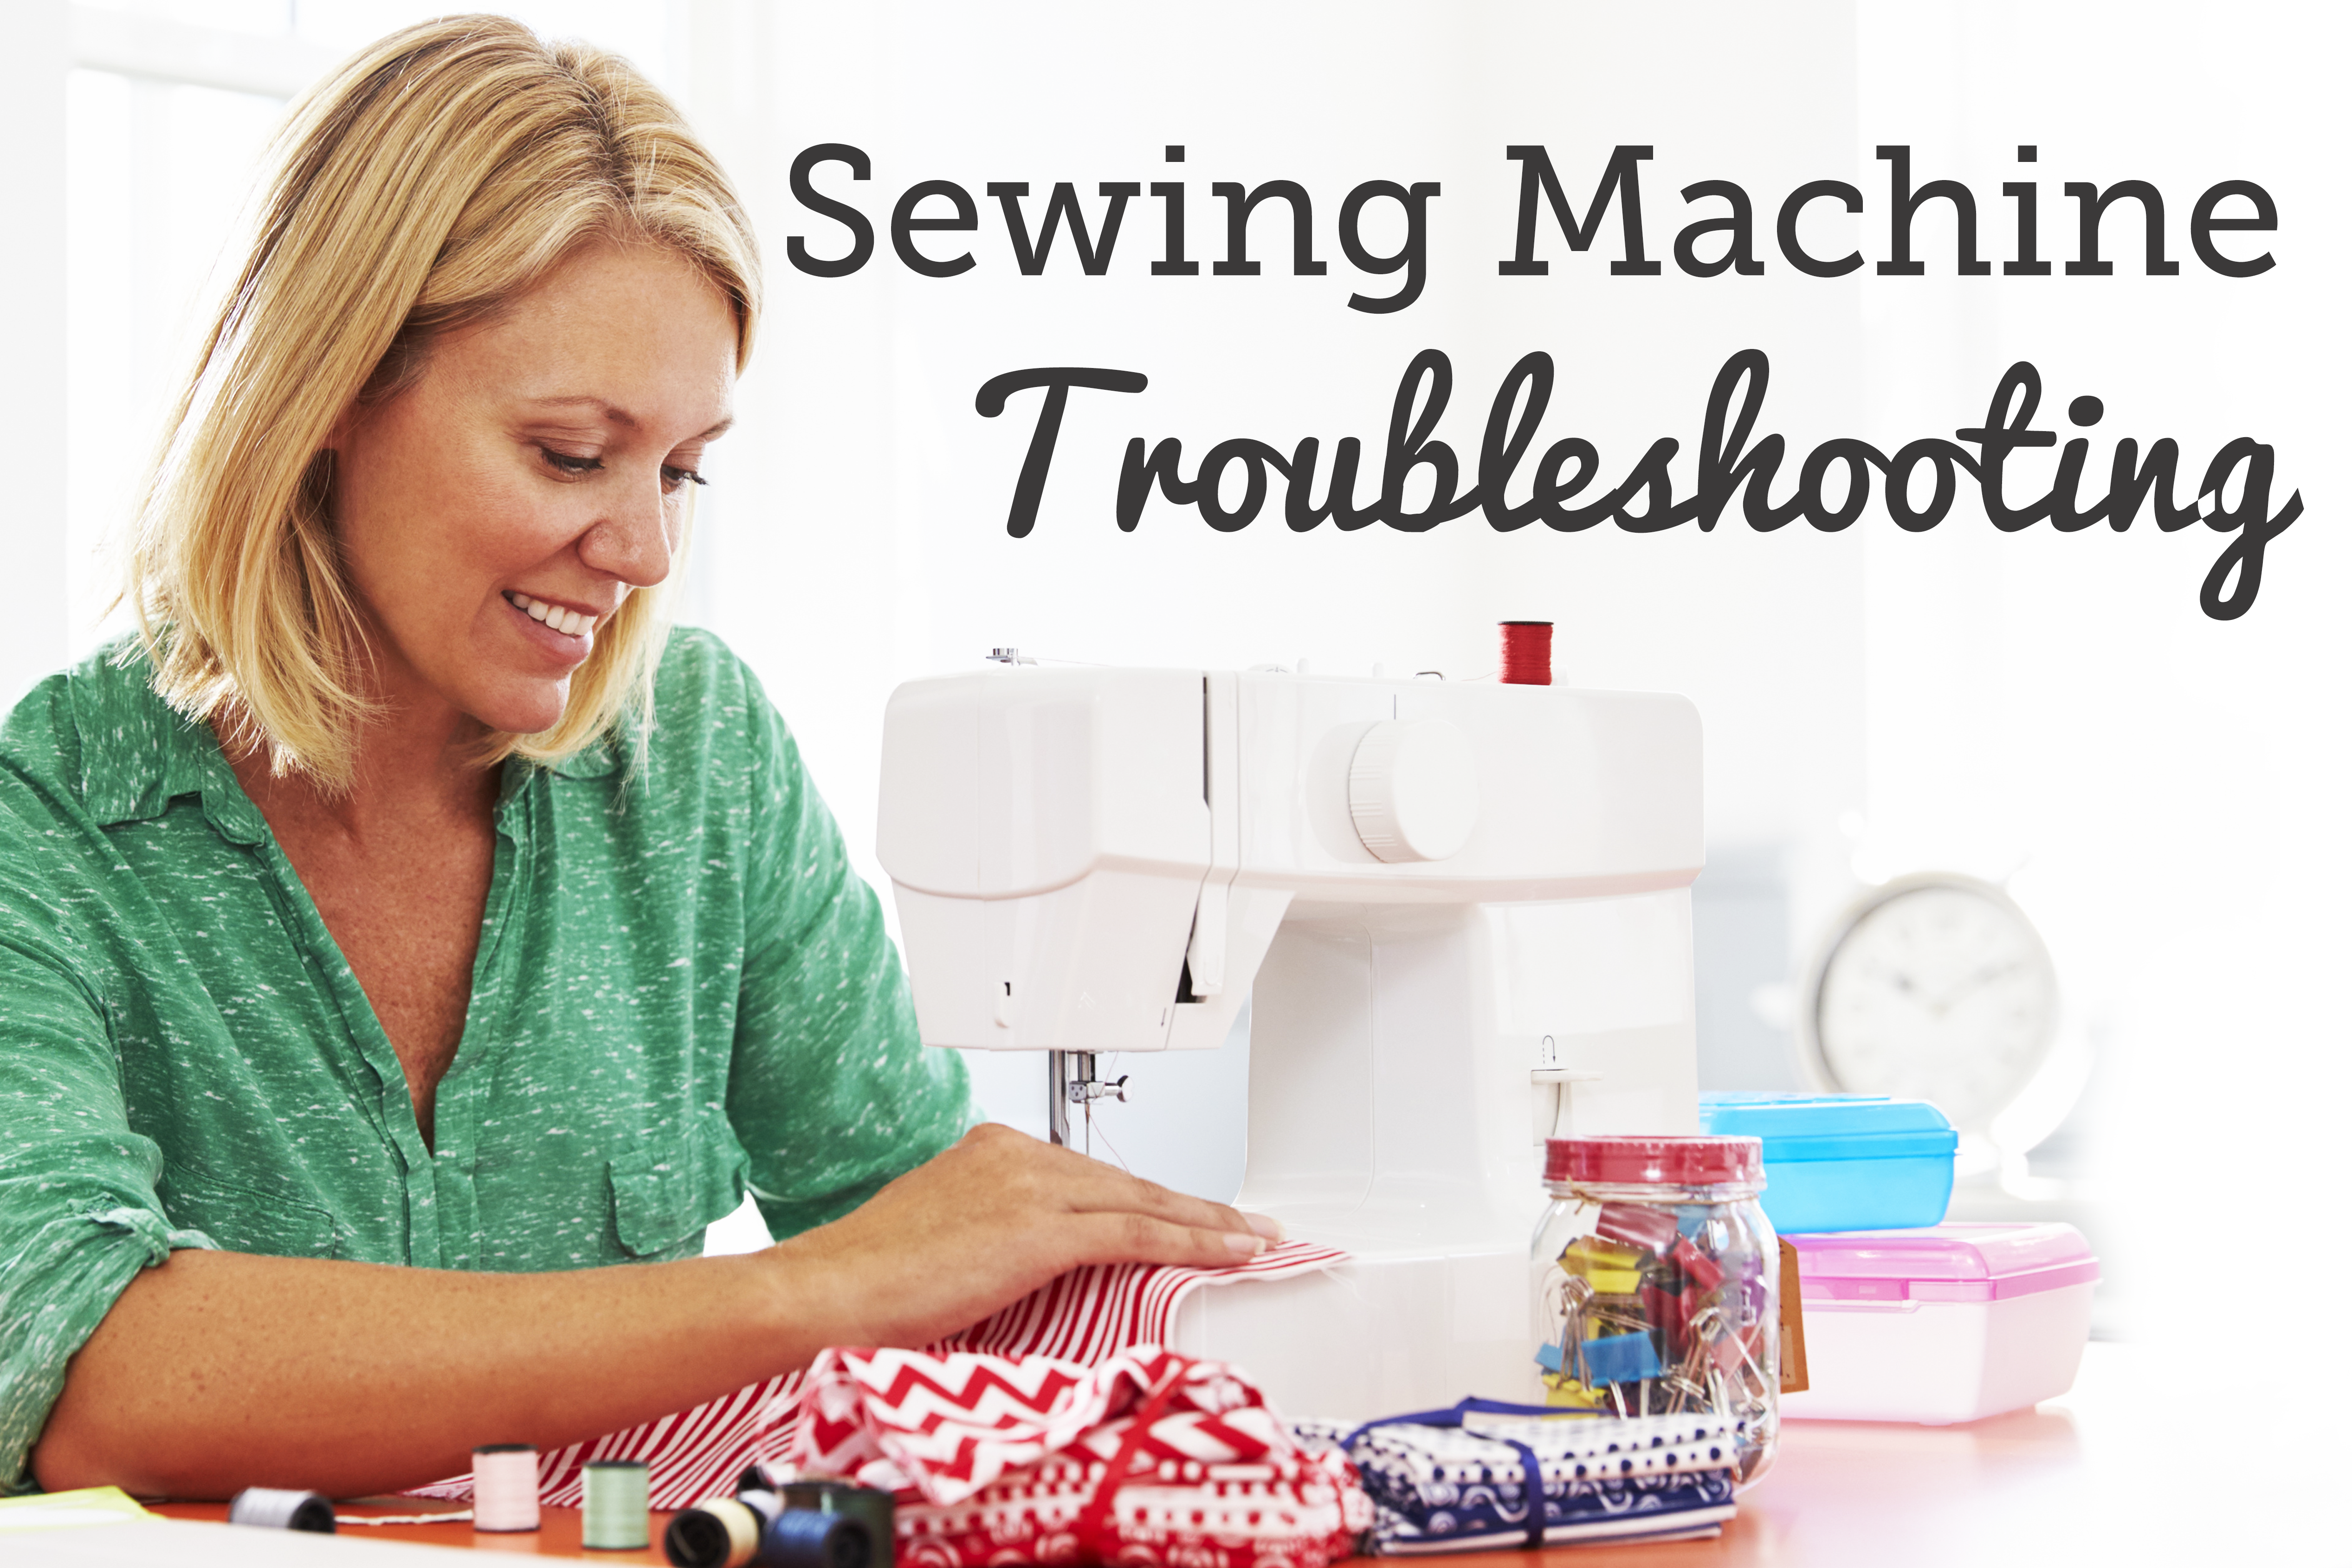 Sewing machine troubleshooting text with a woman at a machine